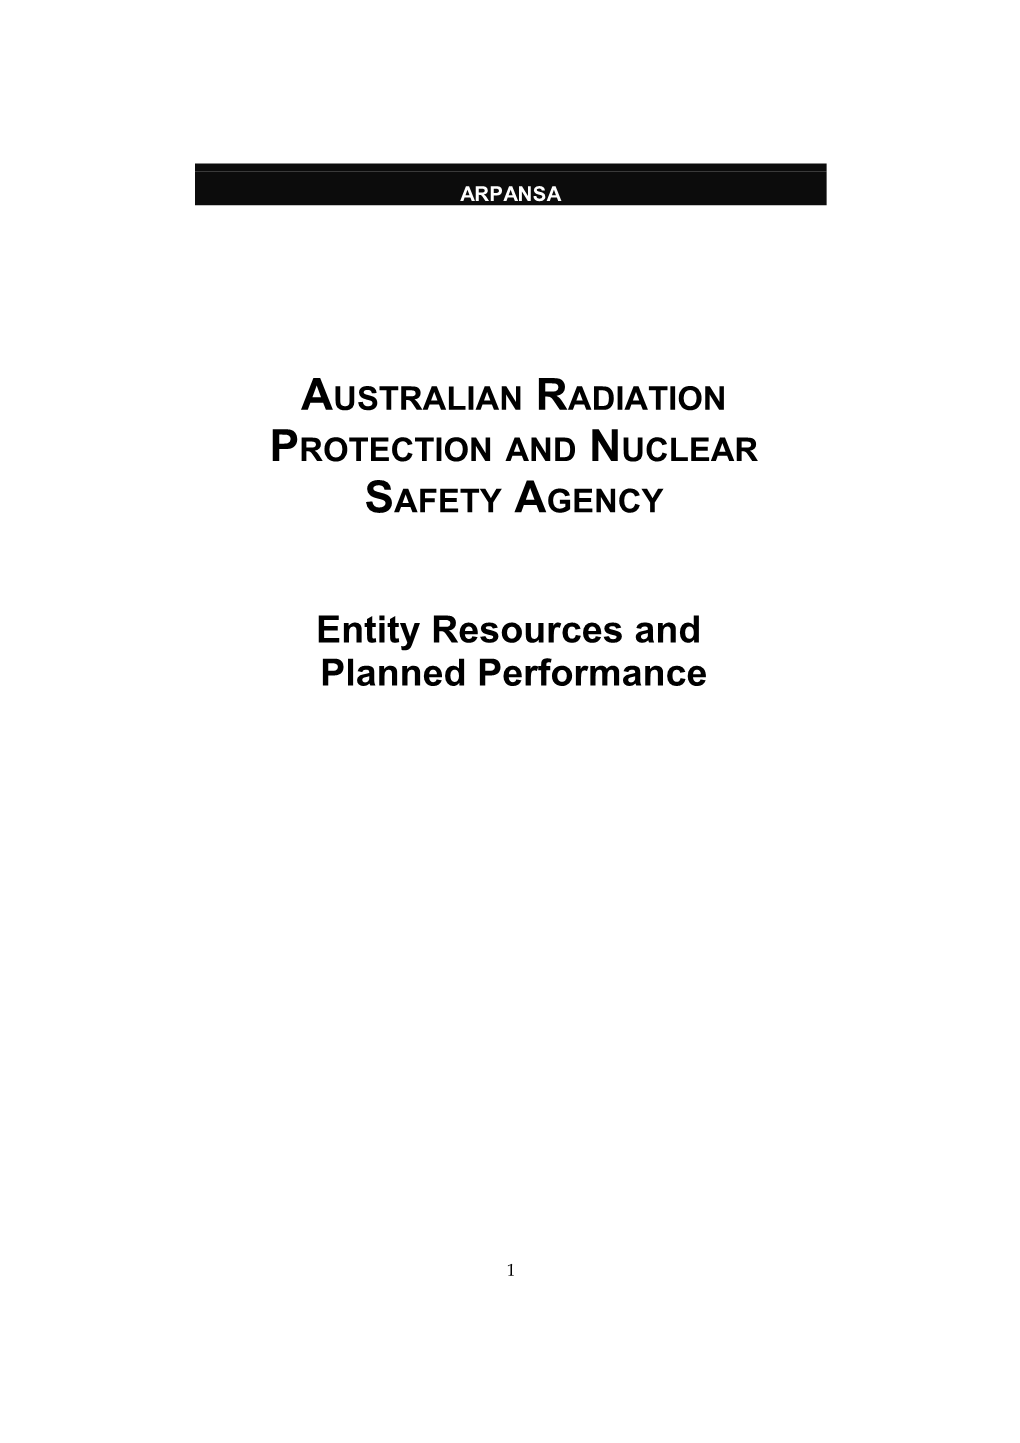 Australian Radiation Protection and Nuclear Safety Agency